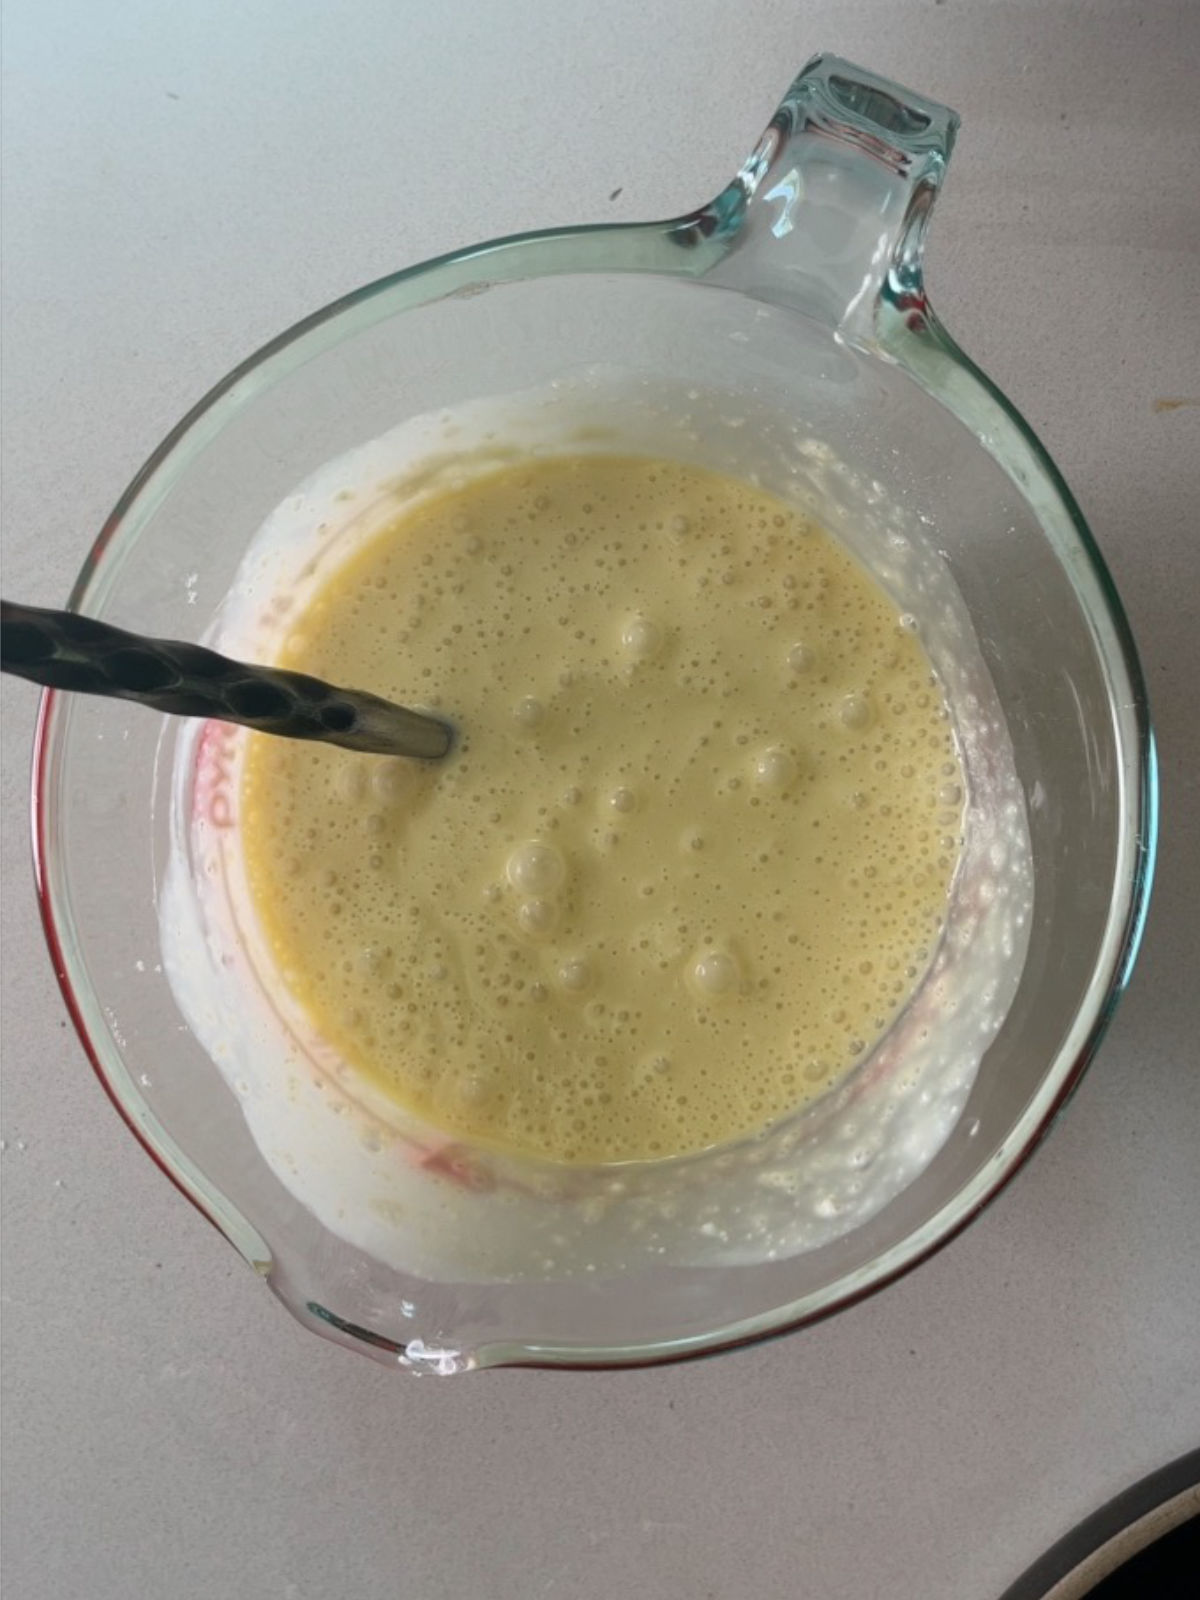 Pale yellow liquid in a glass measuring cup with a metal utensil in it.